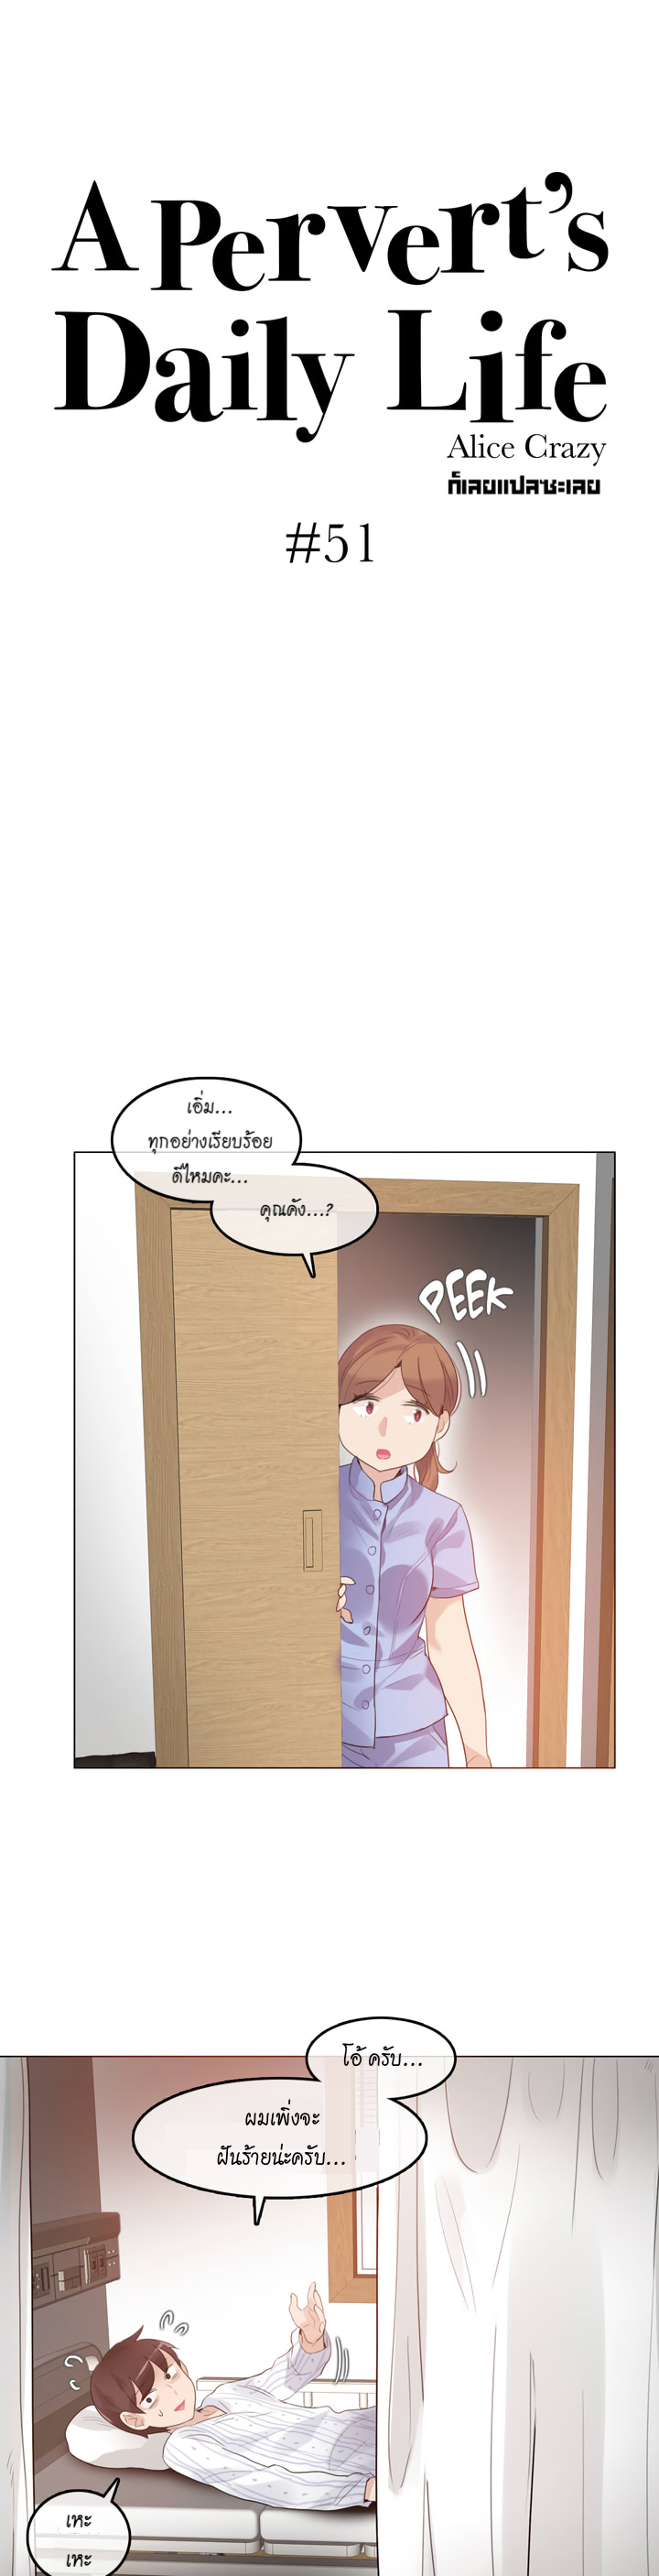 A Pervert’s Daily Life51 (8)